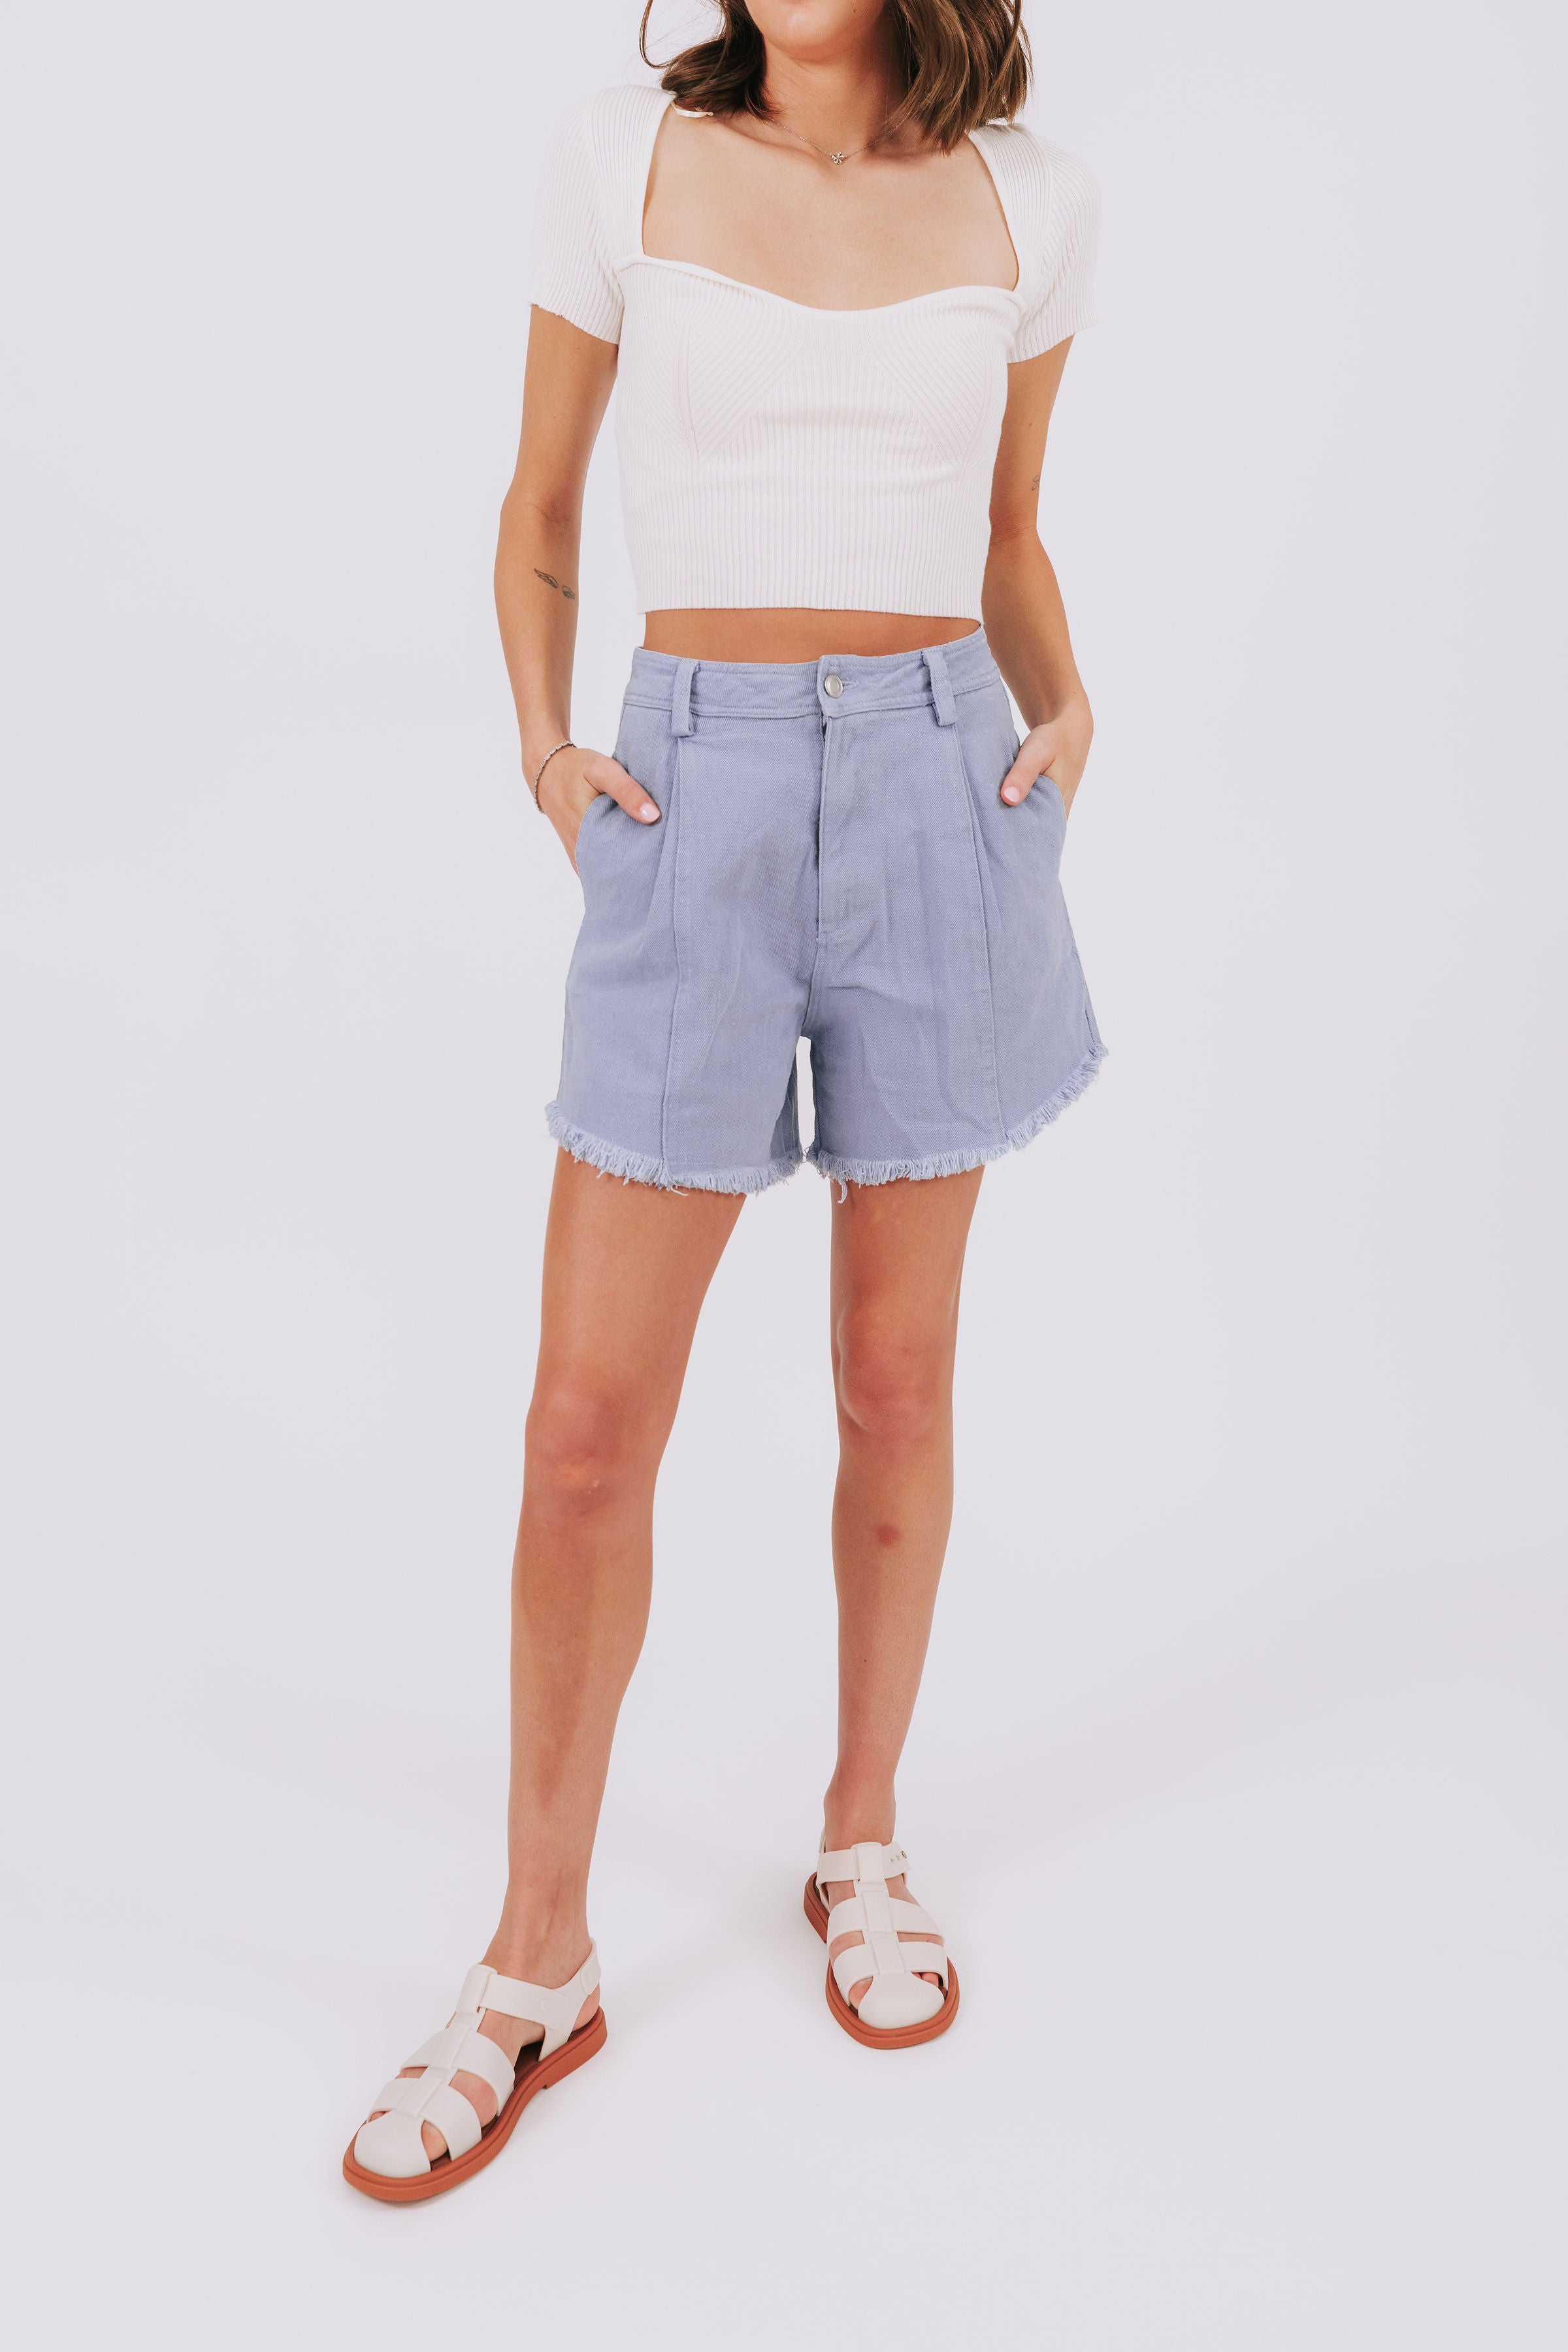 Sandy Flare Shorts - 2 Colors!